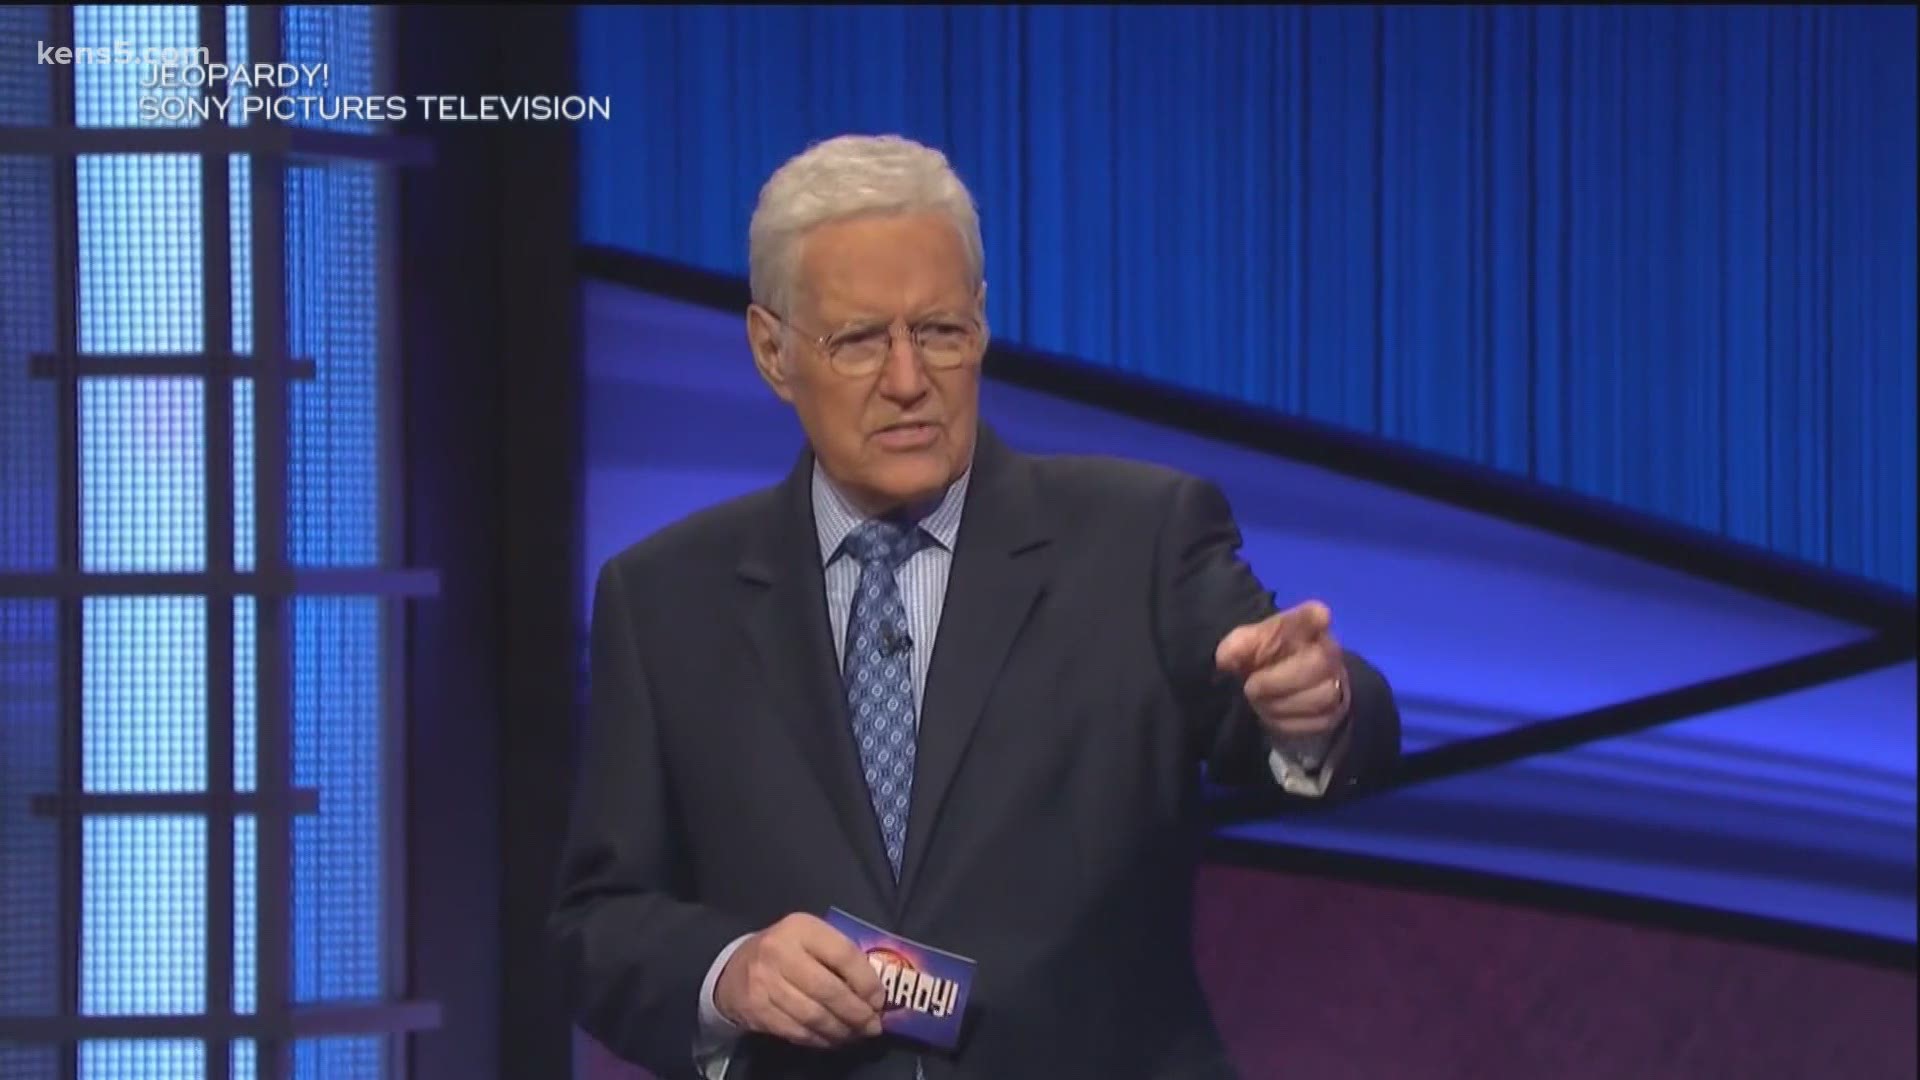 The final Jeopardy! episode with Alex Trebek will air today. The first episode with Jeopardy! champ Ken Jennings is set to air on Monday.